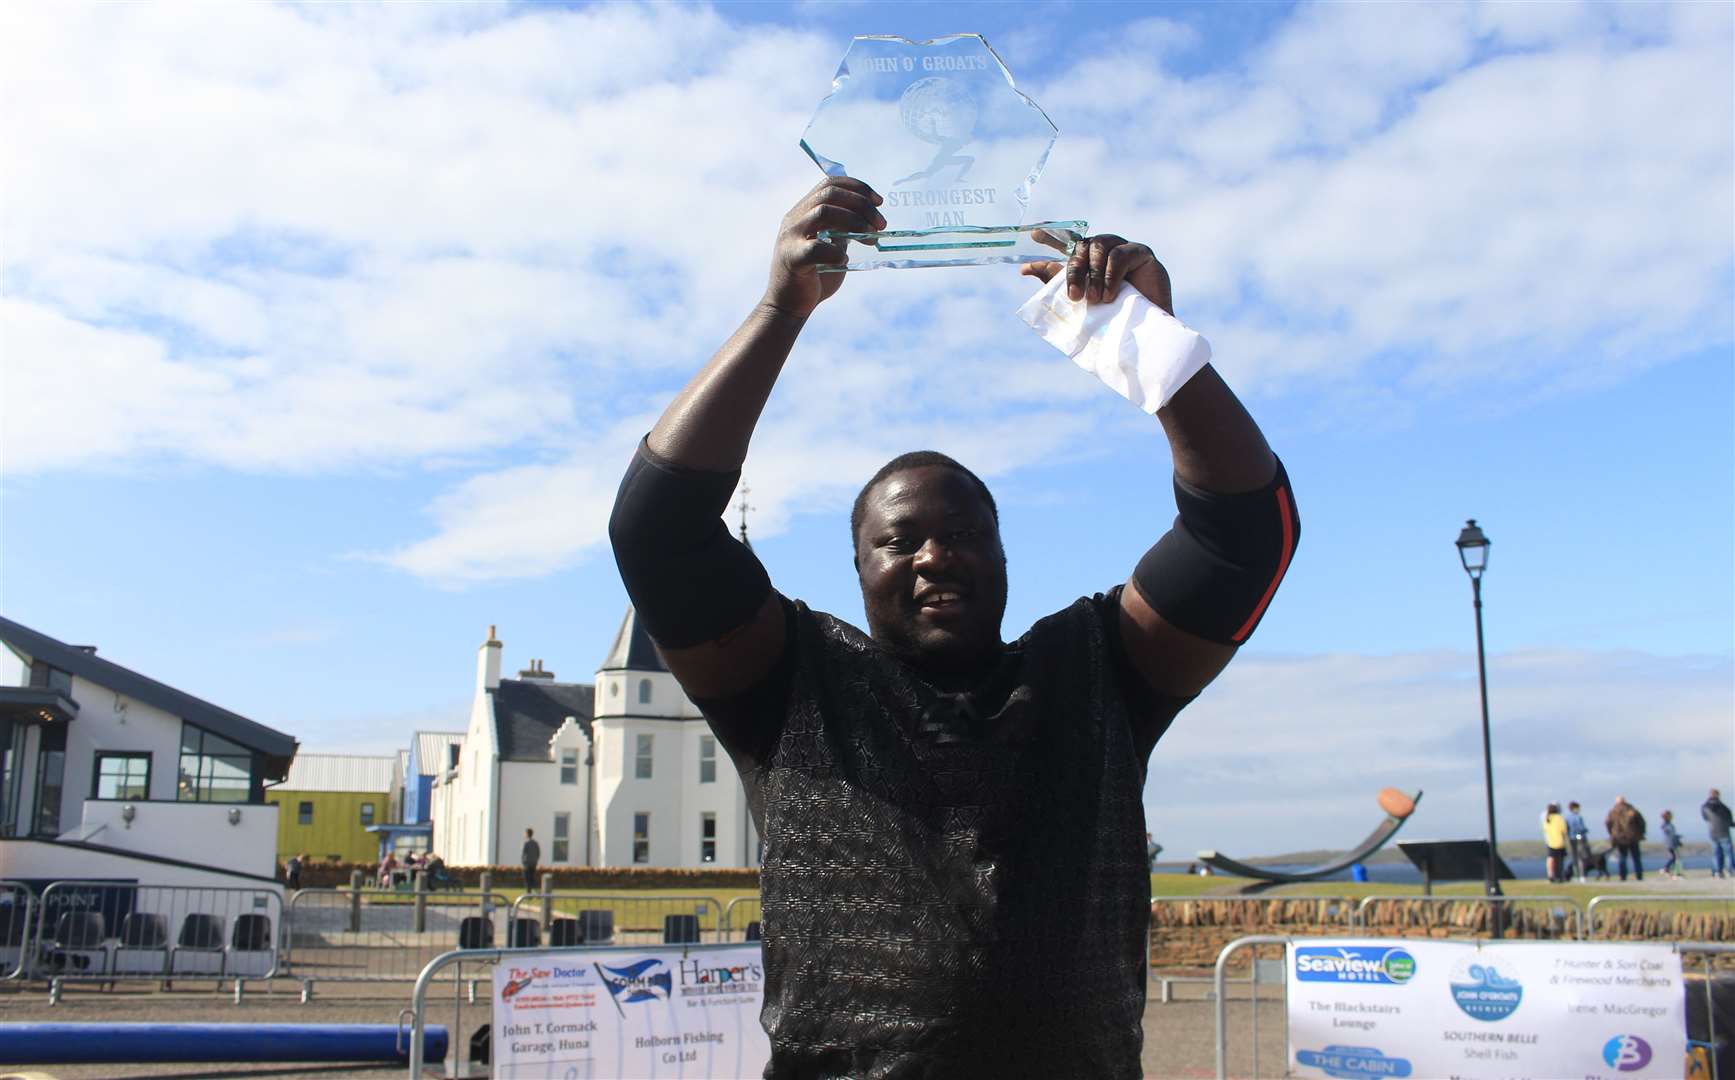 Zake Muluzi, the 'Malawian Monster', with his trophy after winning the John O'Groats Strongest Man competition on Sunday. Picture: Alan Hendry